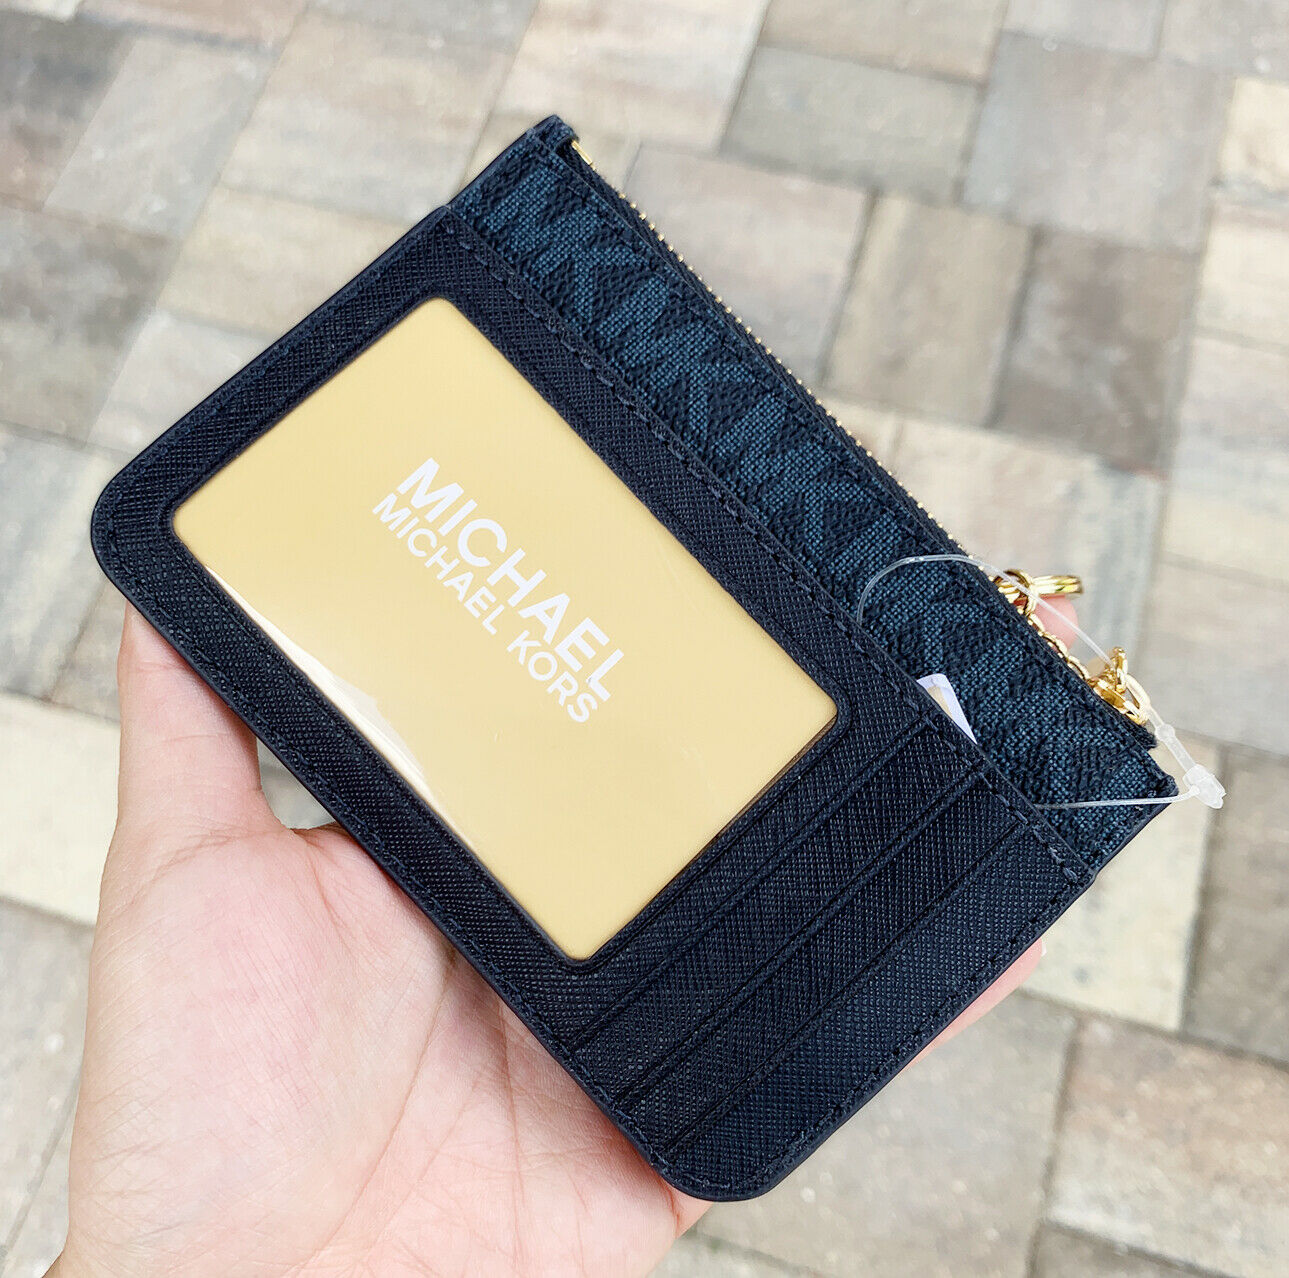 Navy Blue Coin Purse Michael Kors - NY Outlet Brands in Dubai